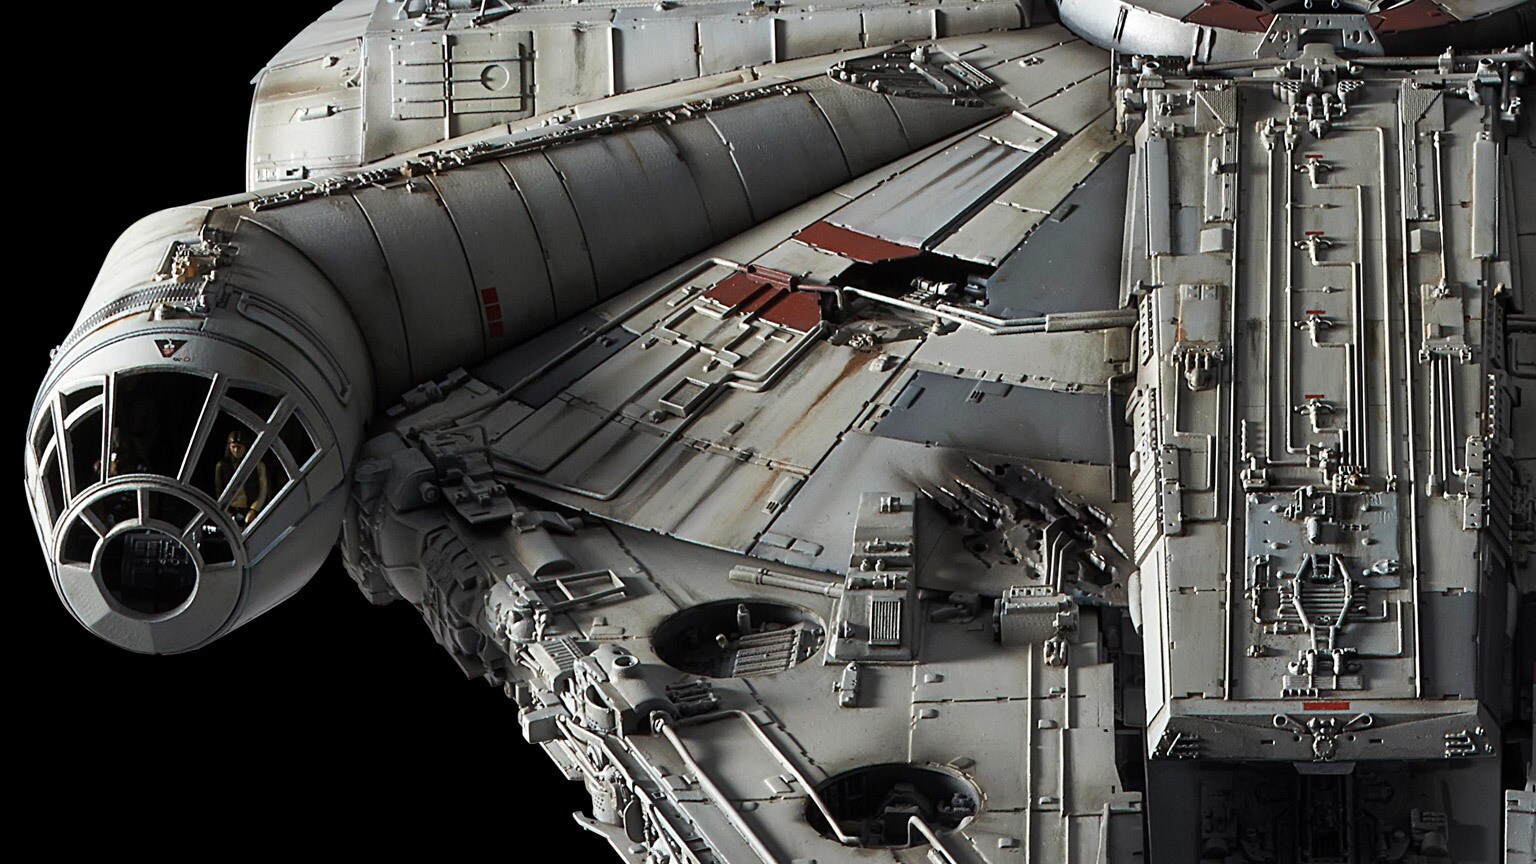 5 Behind-the-Scenes Facts About Bandai's Star Wars Model Kits